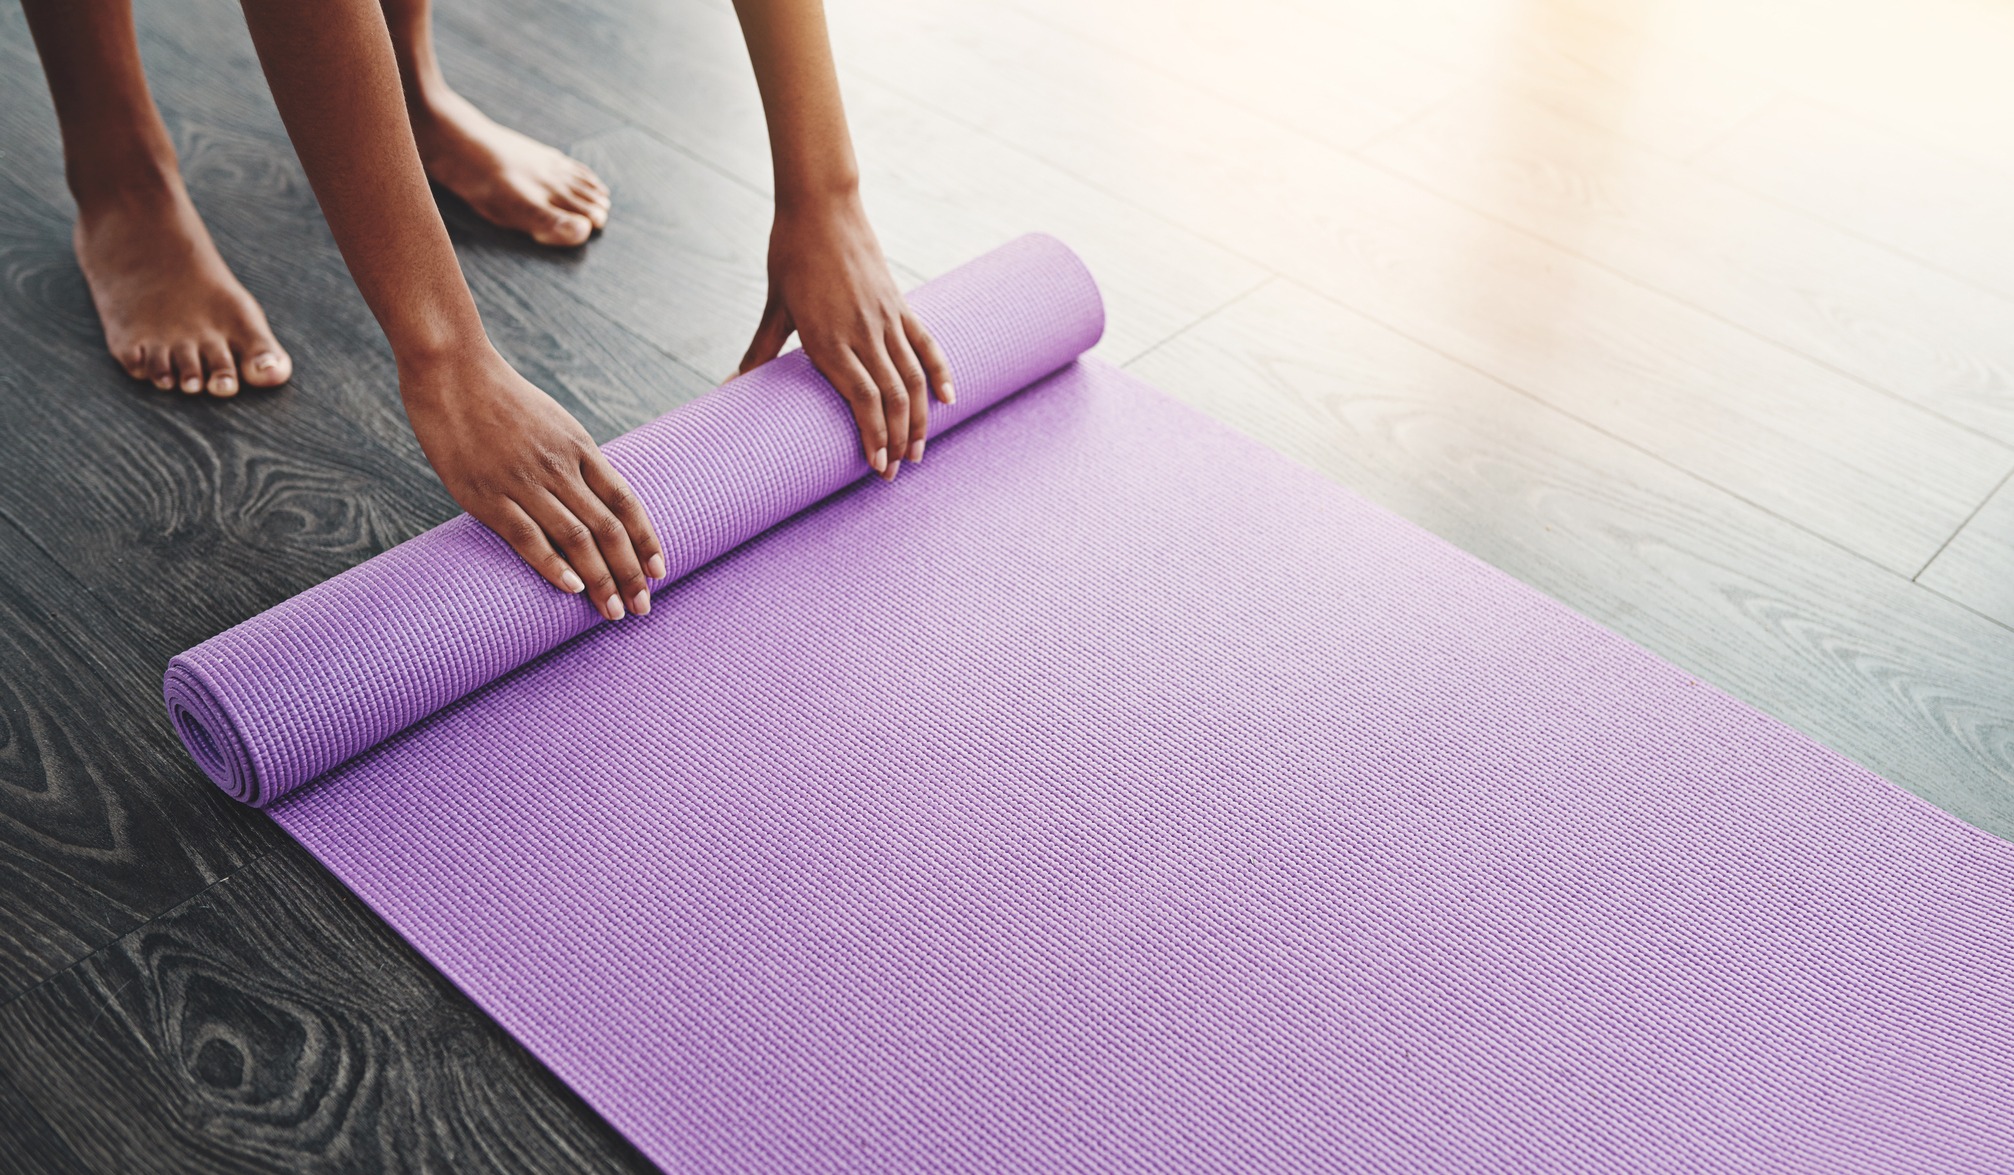 Yoga poses for relieving menstrual cramps